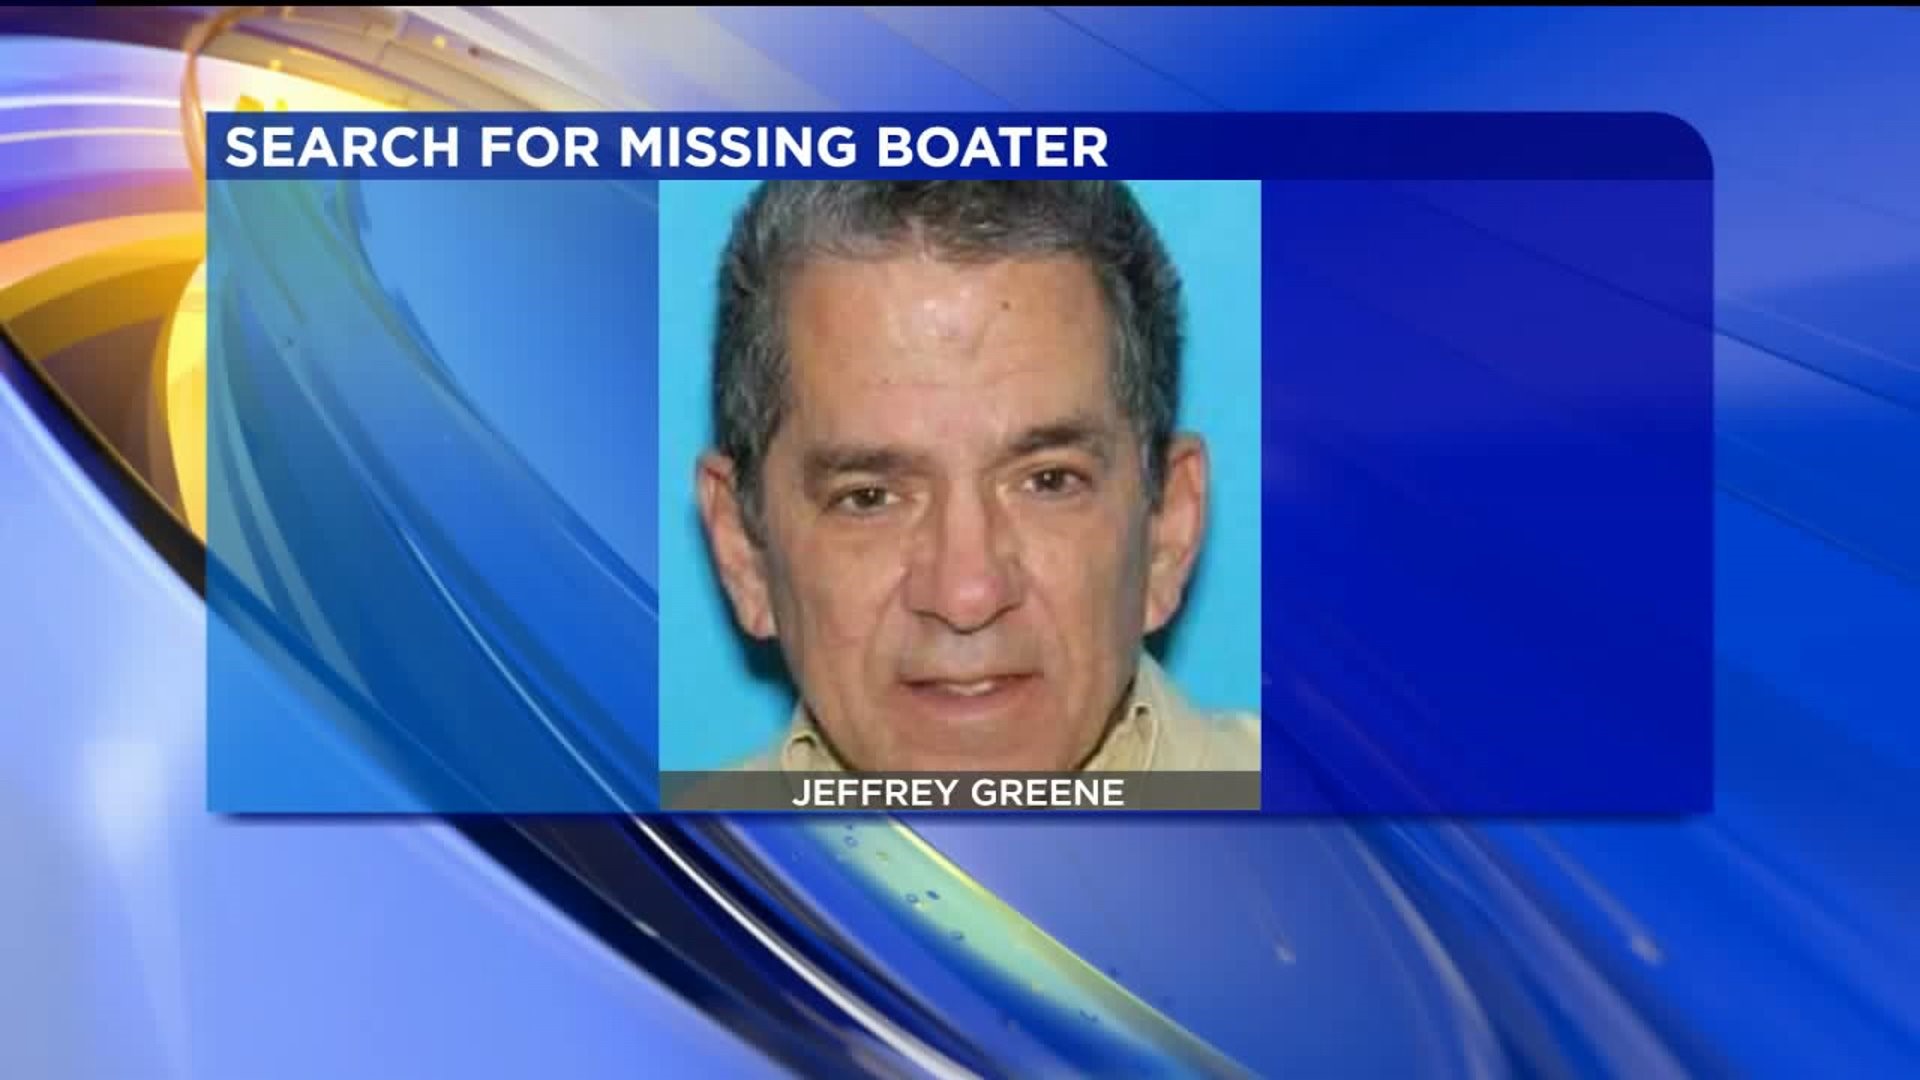 Search for Missing Boater in Wayne County